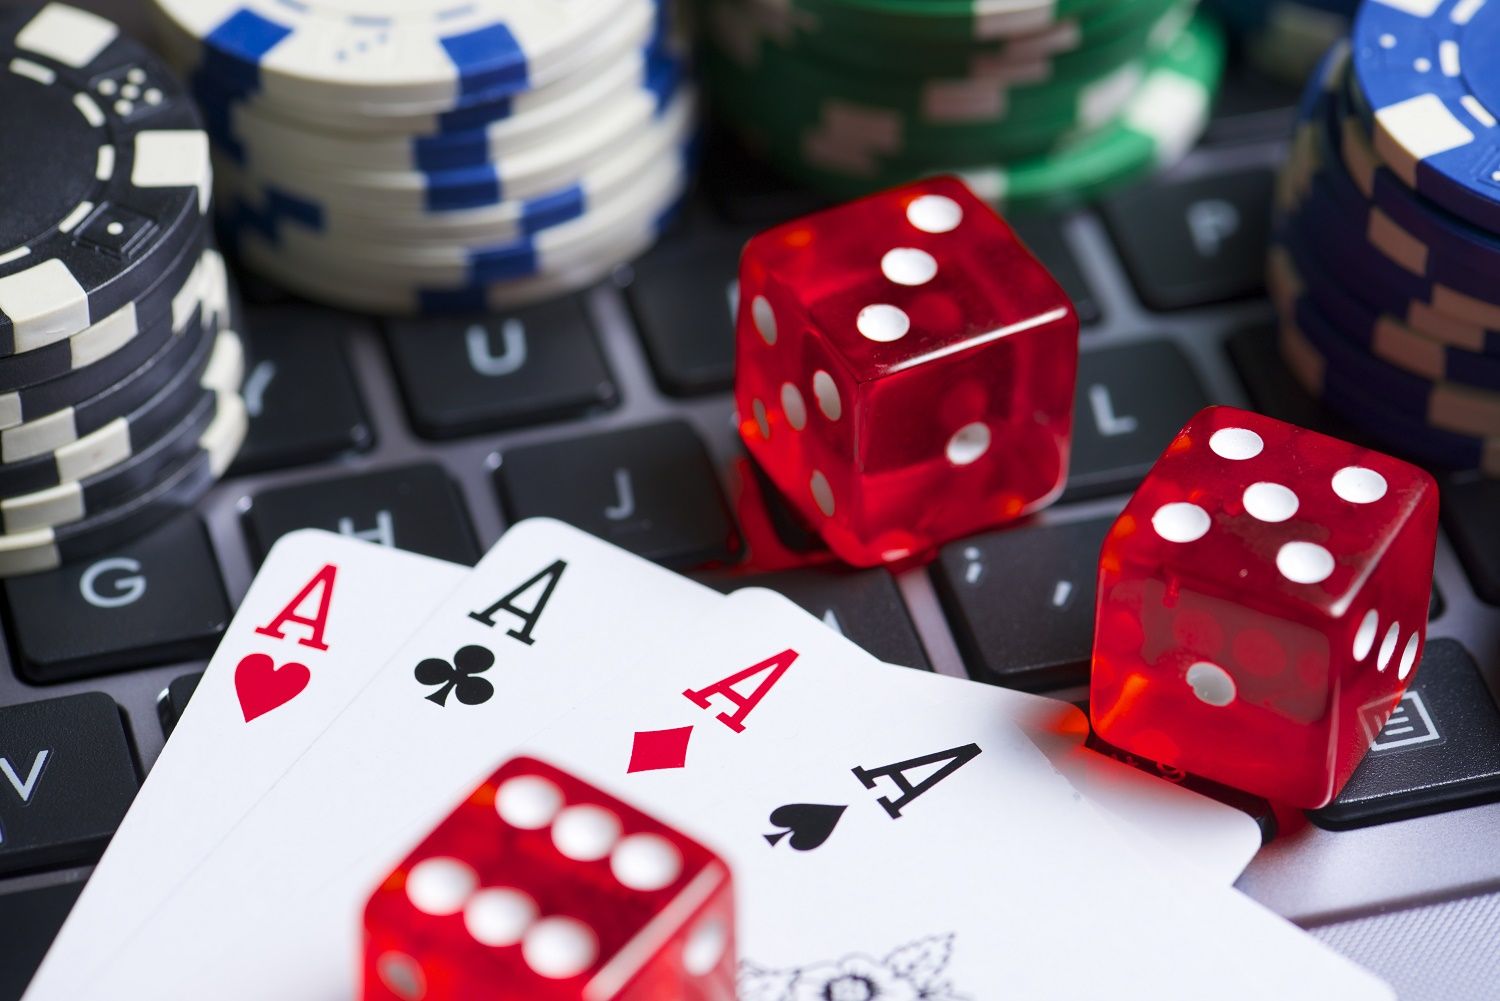 Gambling operates in a market characterized by volatility